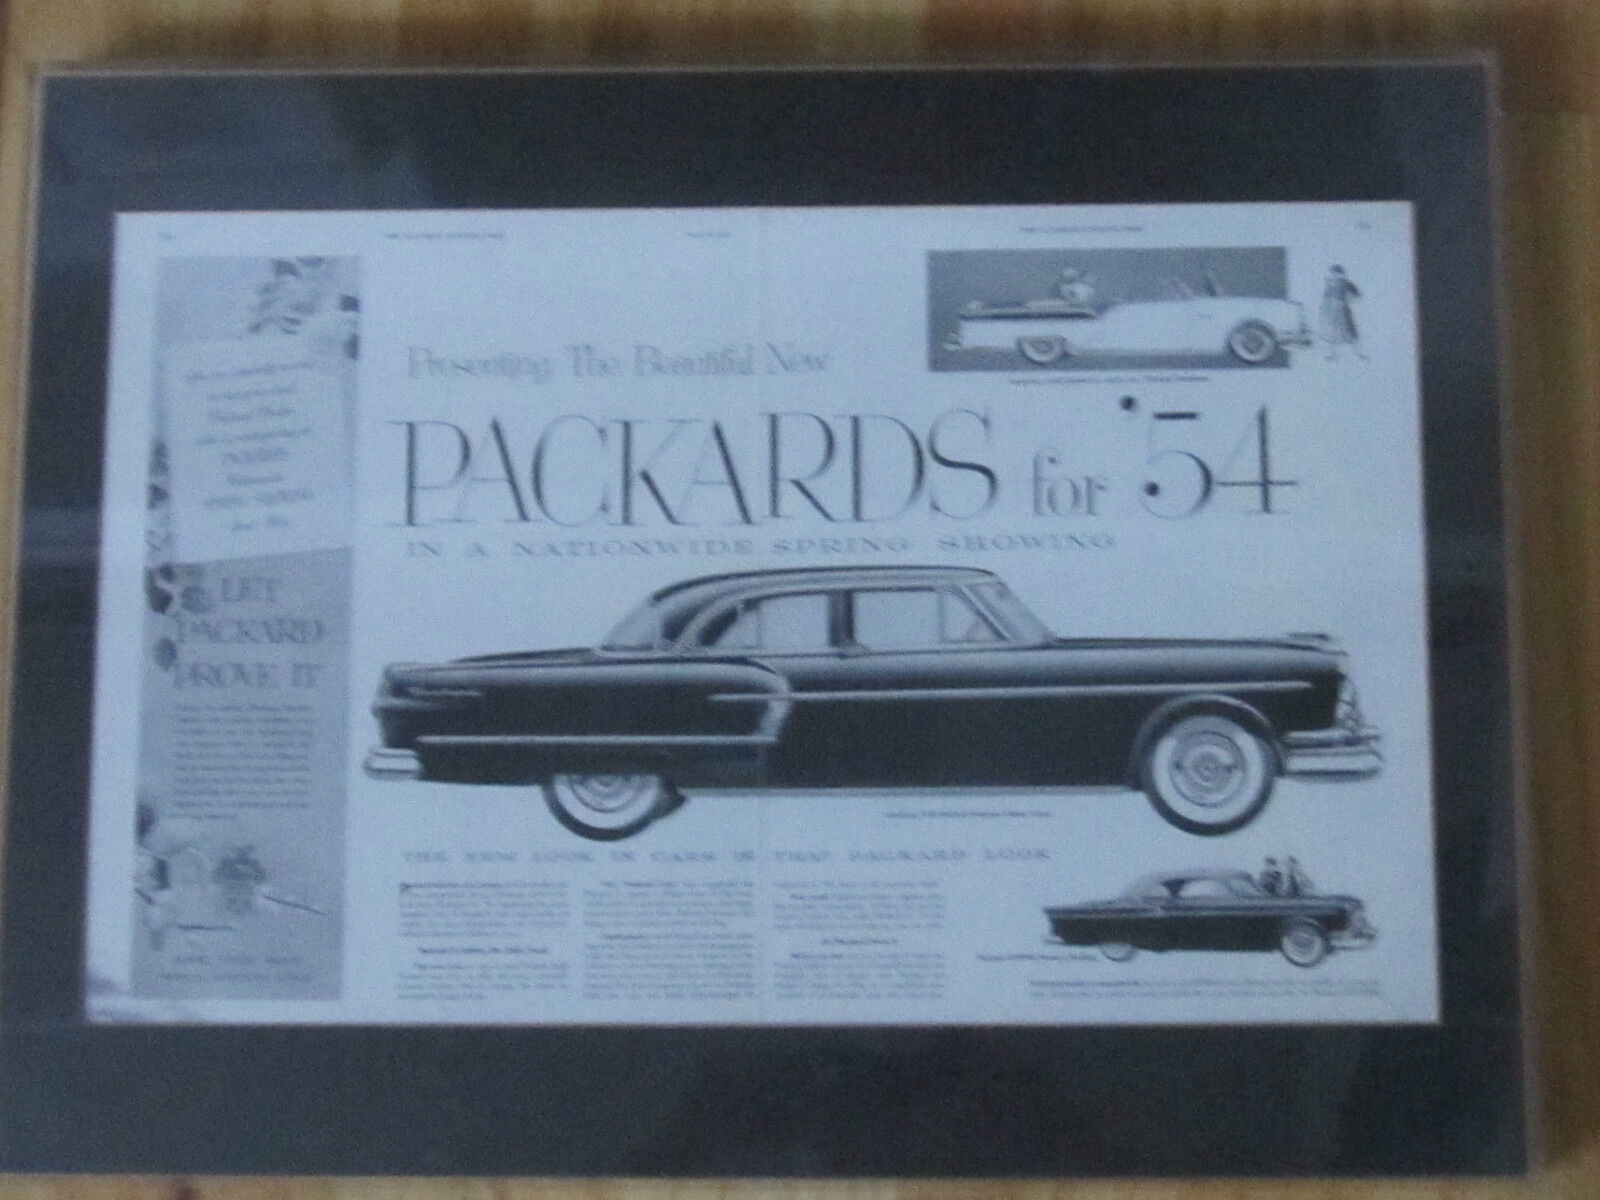 FRAMED 1954 PACKARD AUTOMOBILE AD FROM THE SAT. EVENING POST - LUCITE FRAMED -